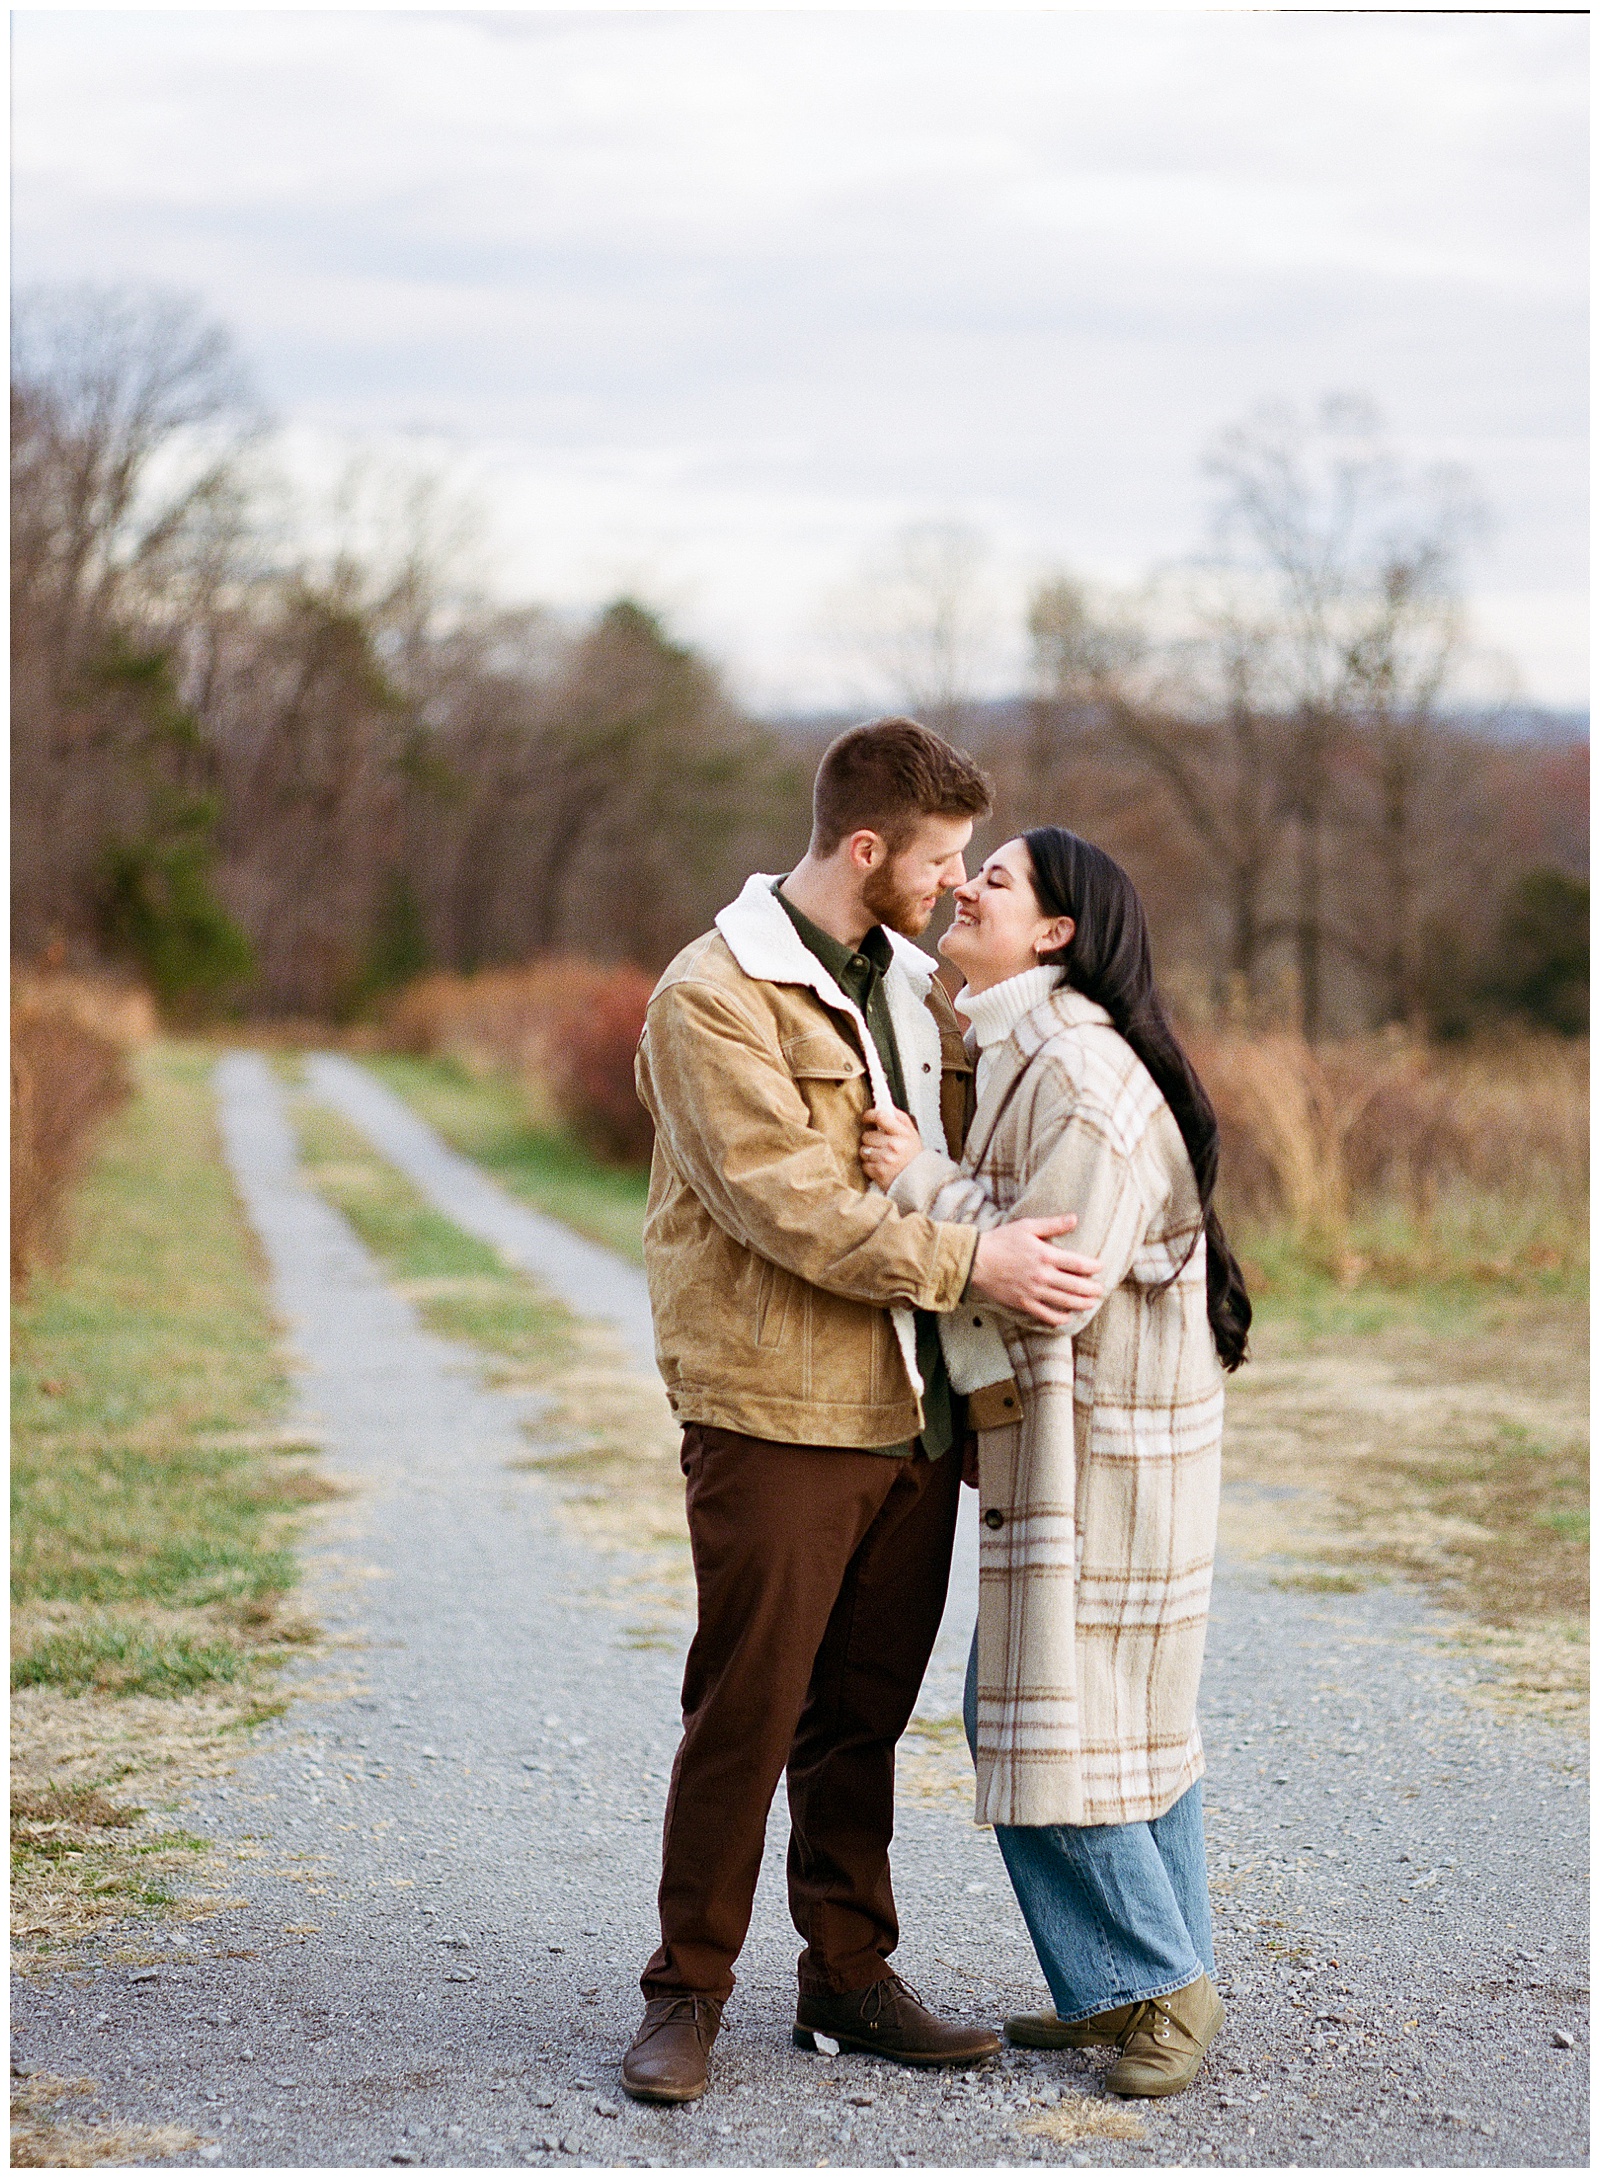 Engaged man and woman wearing winter coats in winter snuggled up at their farm engagement session.